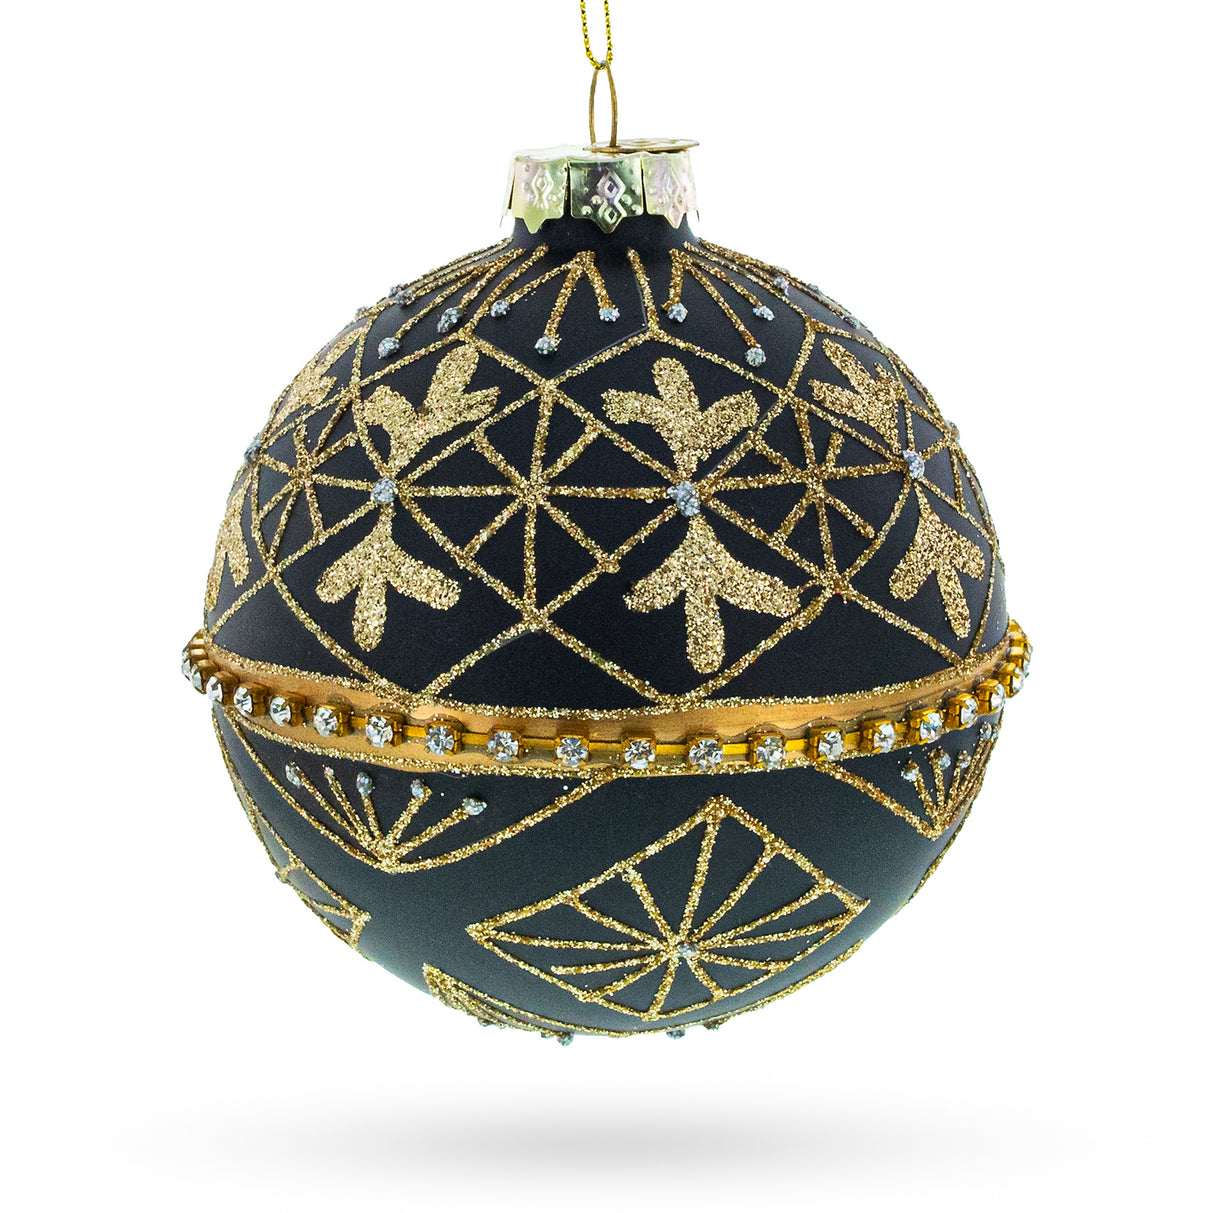 Glass Striped Black with Diamond Accents - Blown Glass Christmas Ornament in Black color Round